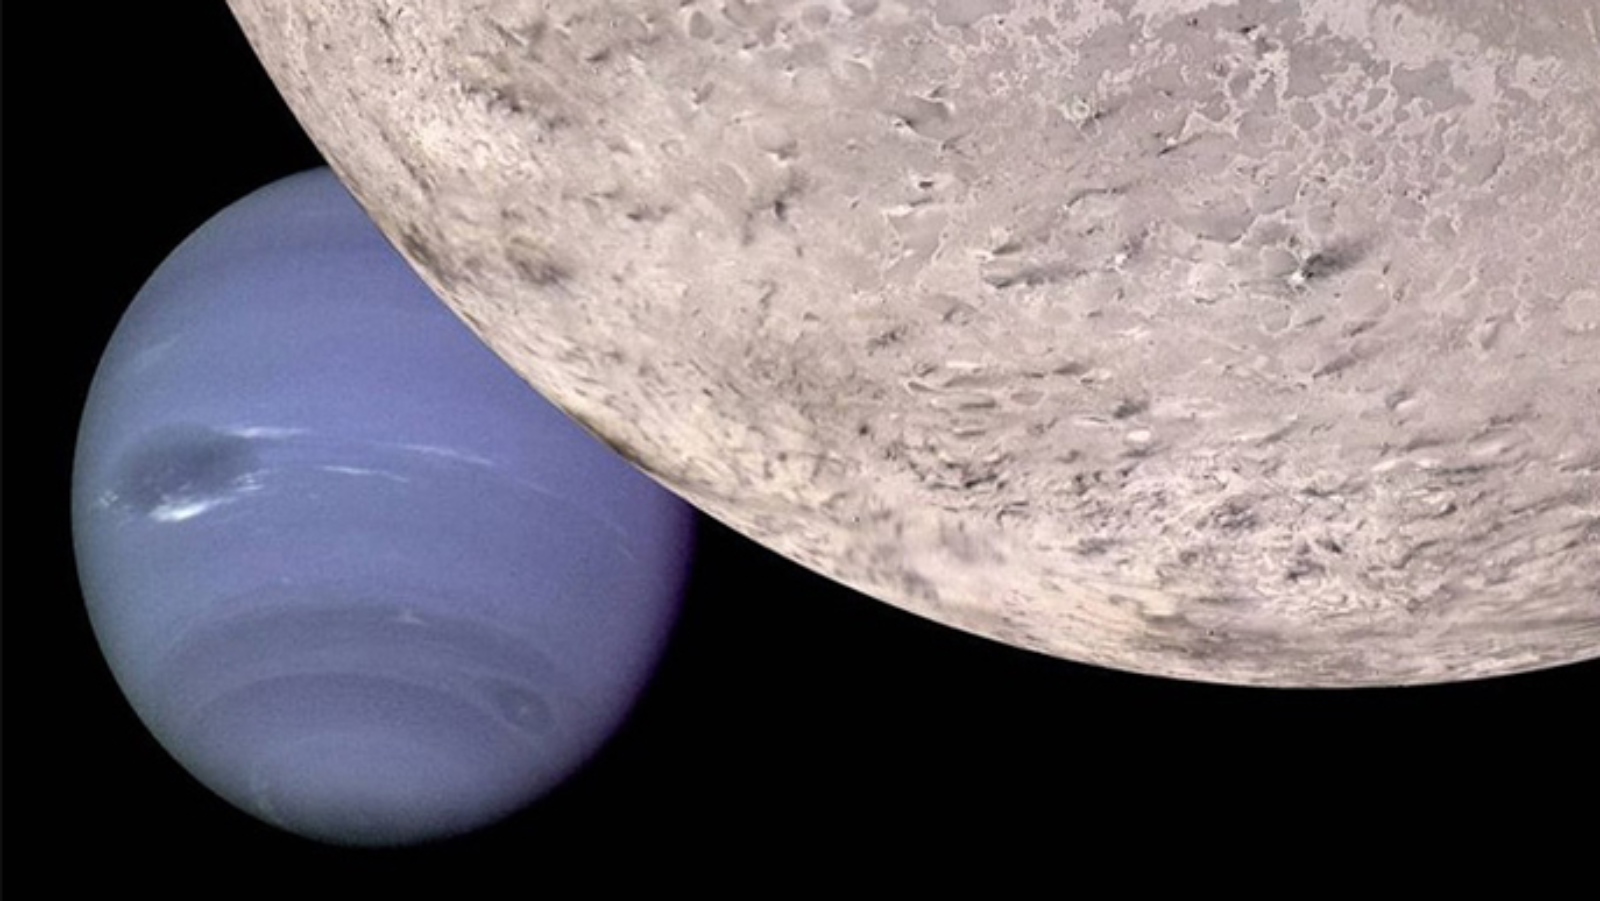 Artist's illustration of Neptune seen from beyond Triton. Image courtesy of NASA